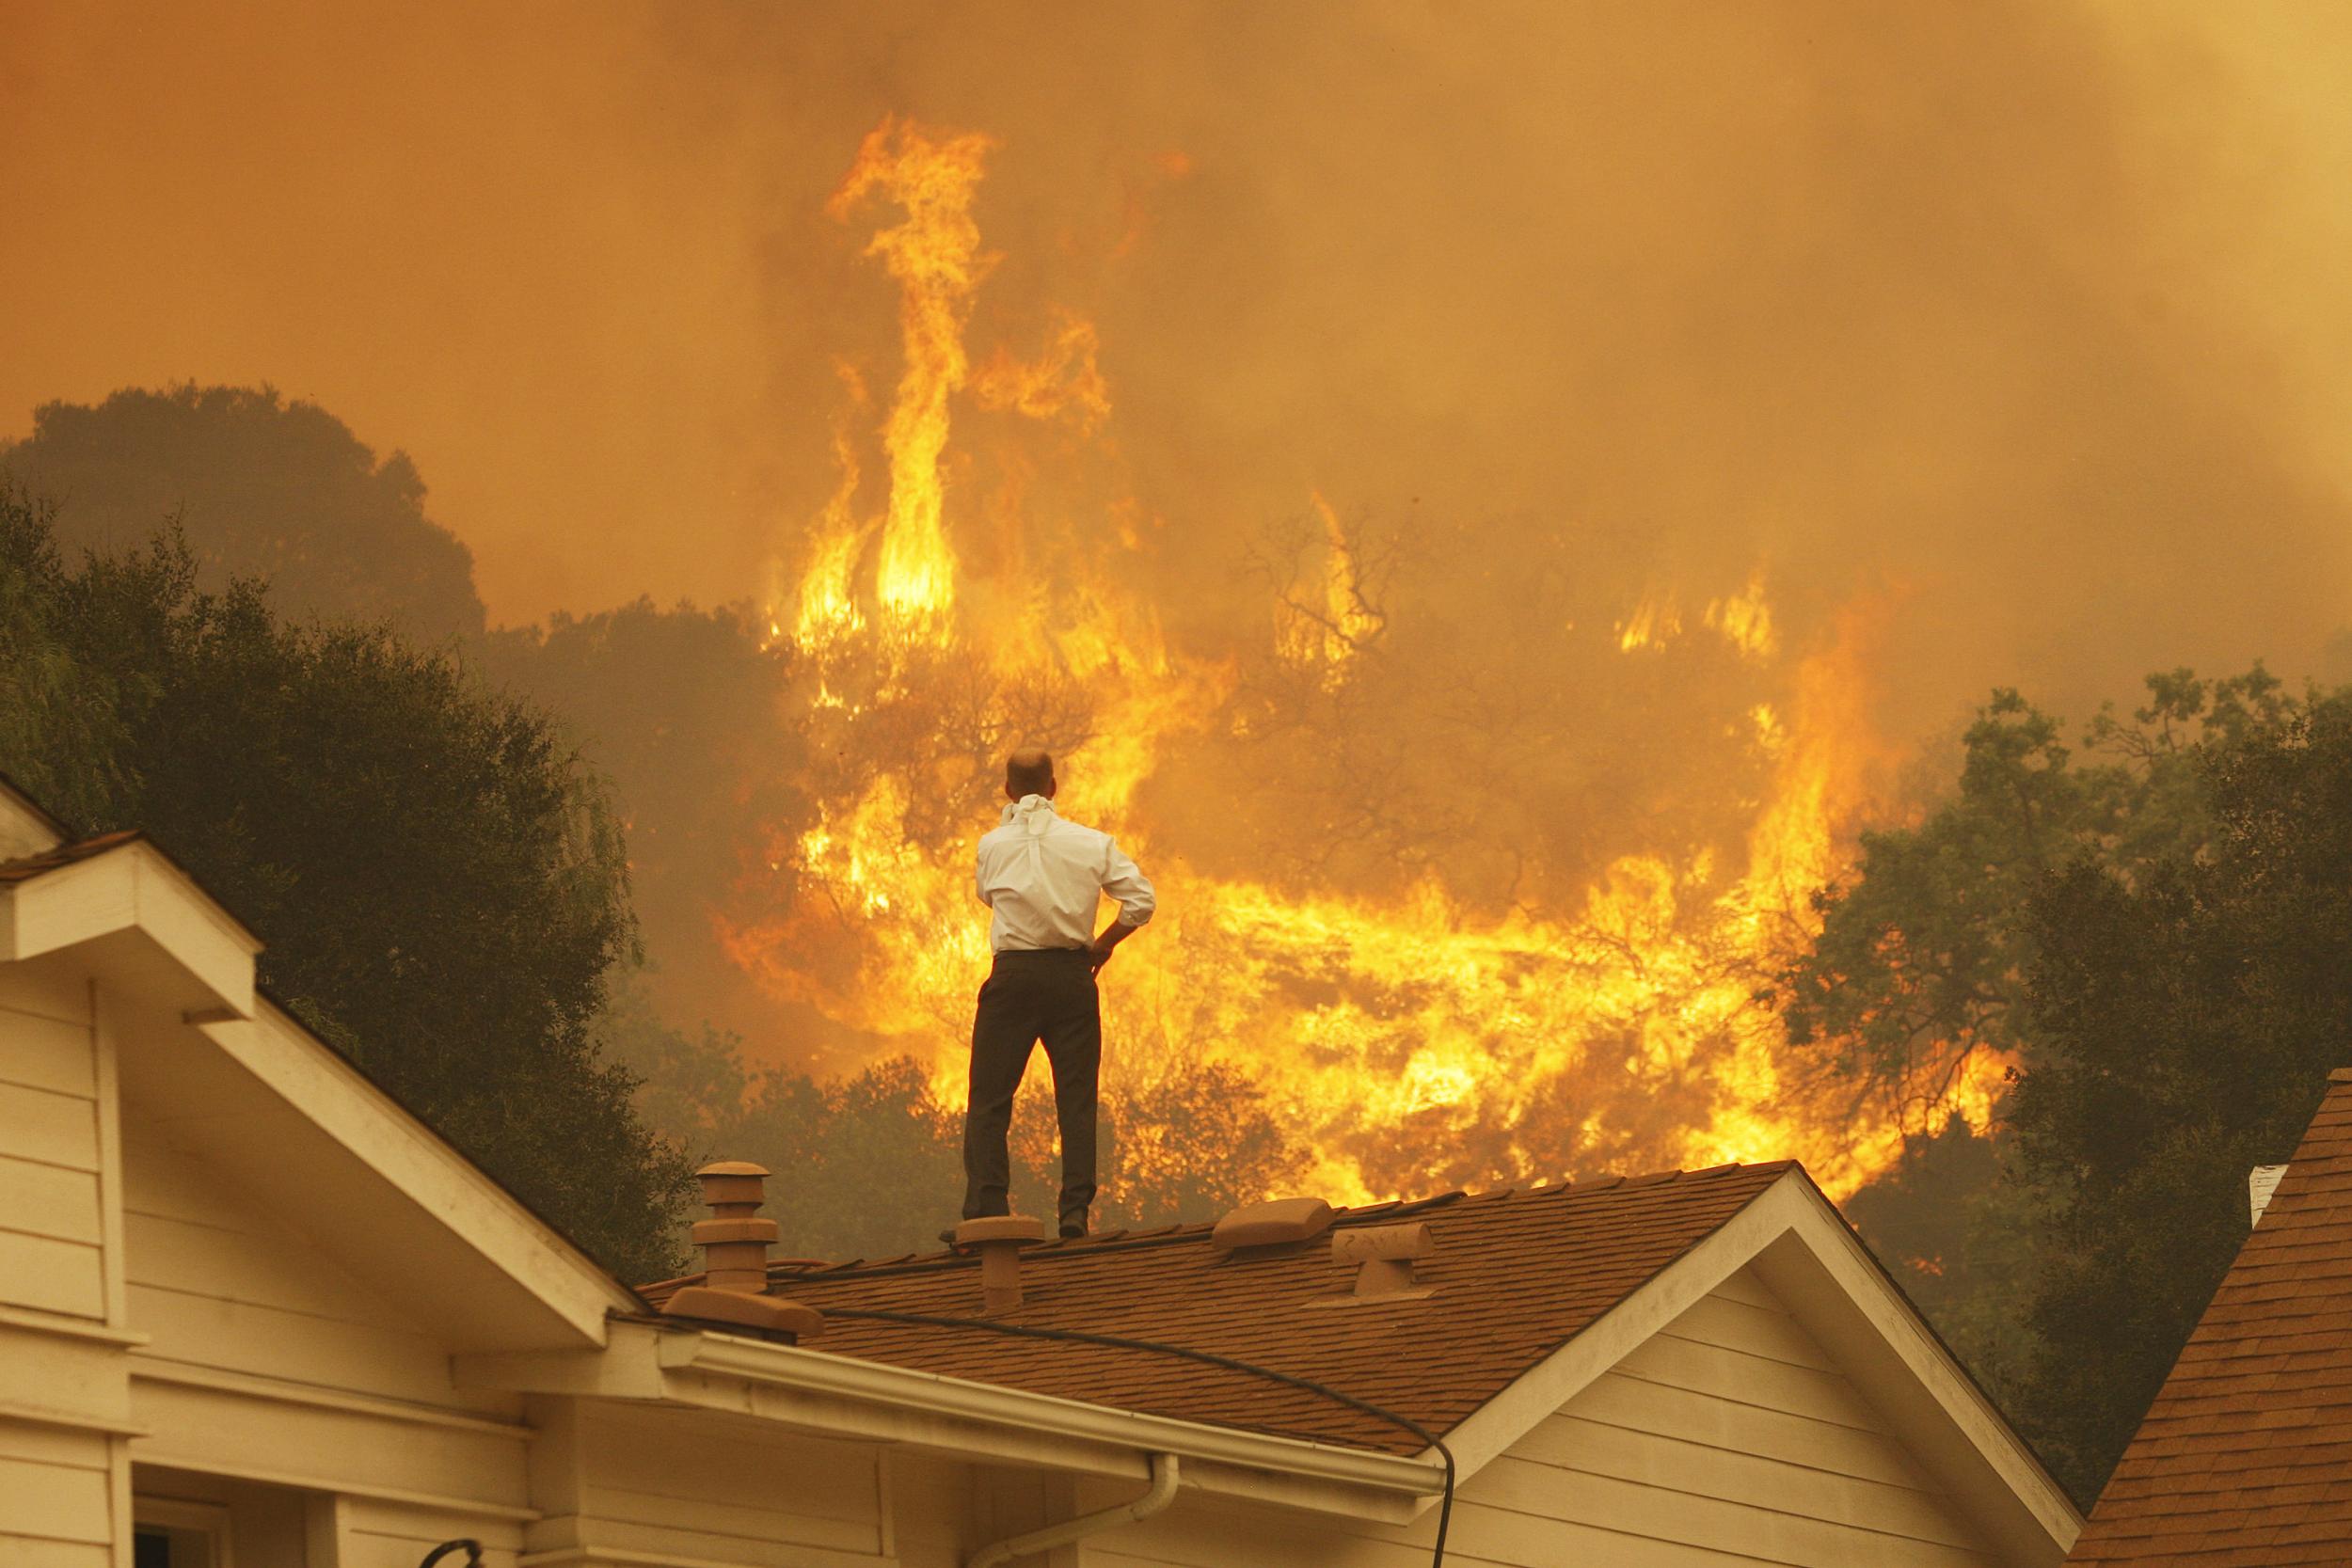 Wildfires were one of the many impacts of climate change assessed in the study